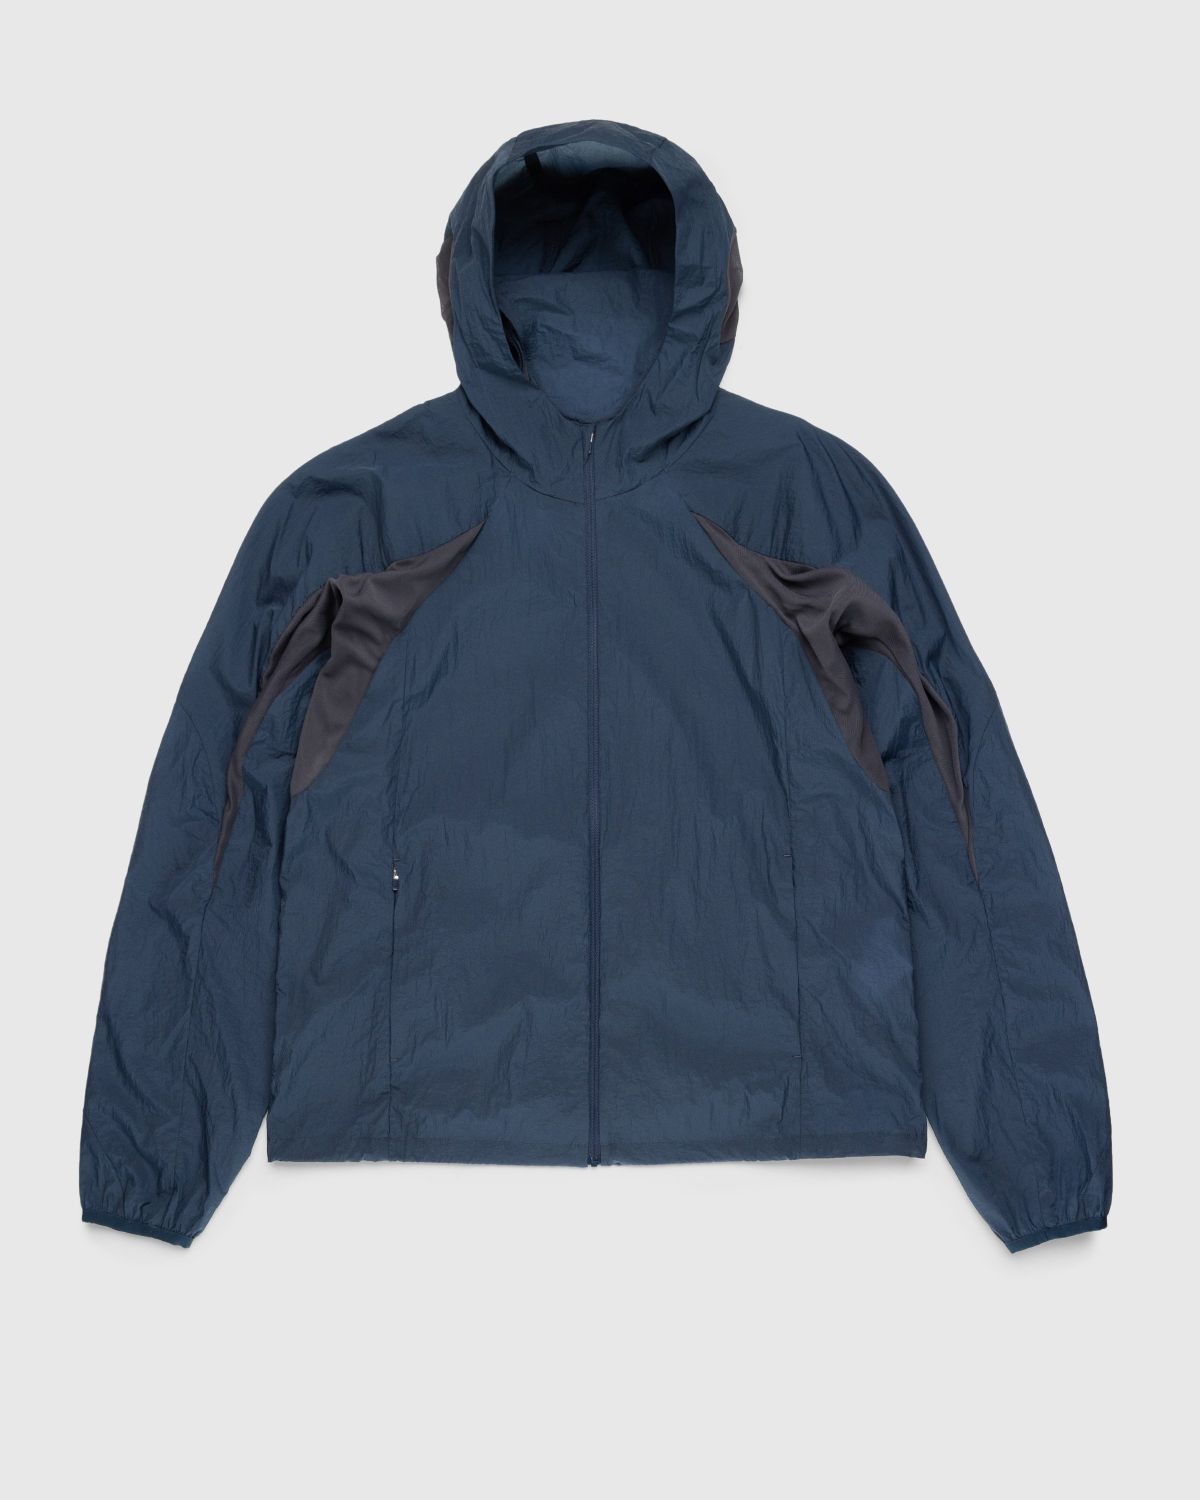 Post Archive Faction (PAF) – 5.0+ Technical Jacket Right Navy - 1